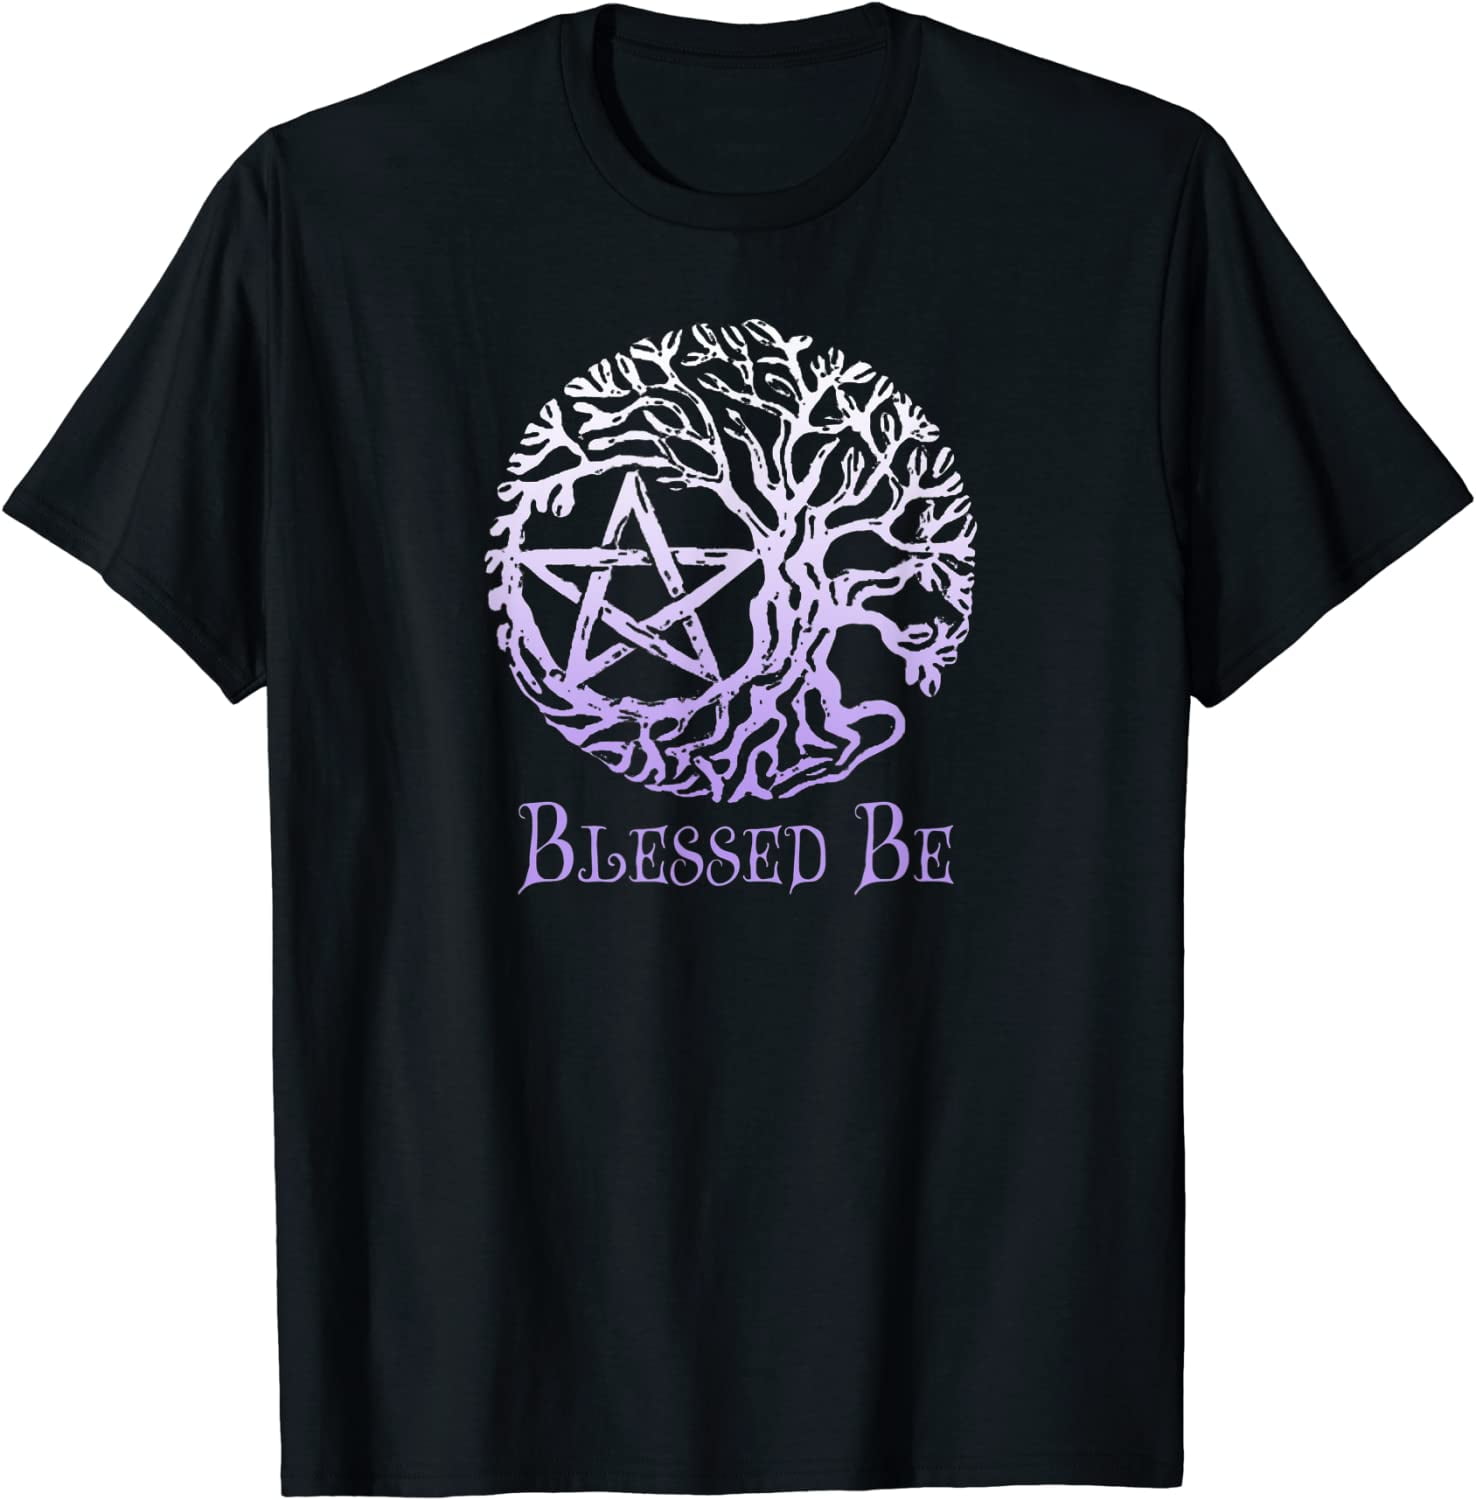 Wiccan and Pagan T-Shirts, Tree of Life Pentacle, Blessed Be - Walmart.com